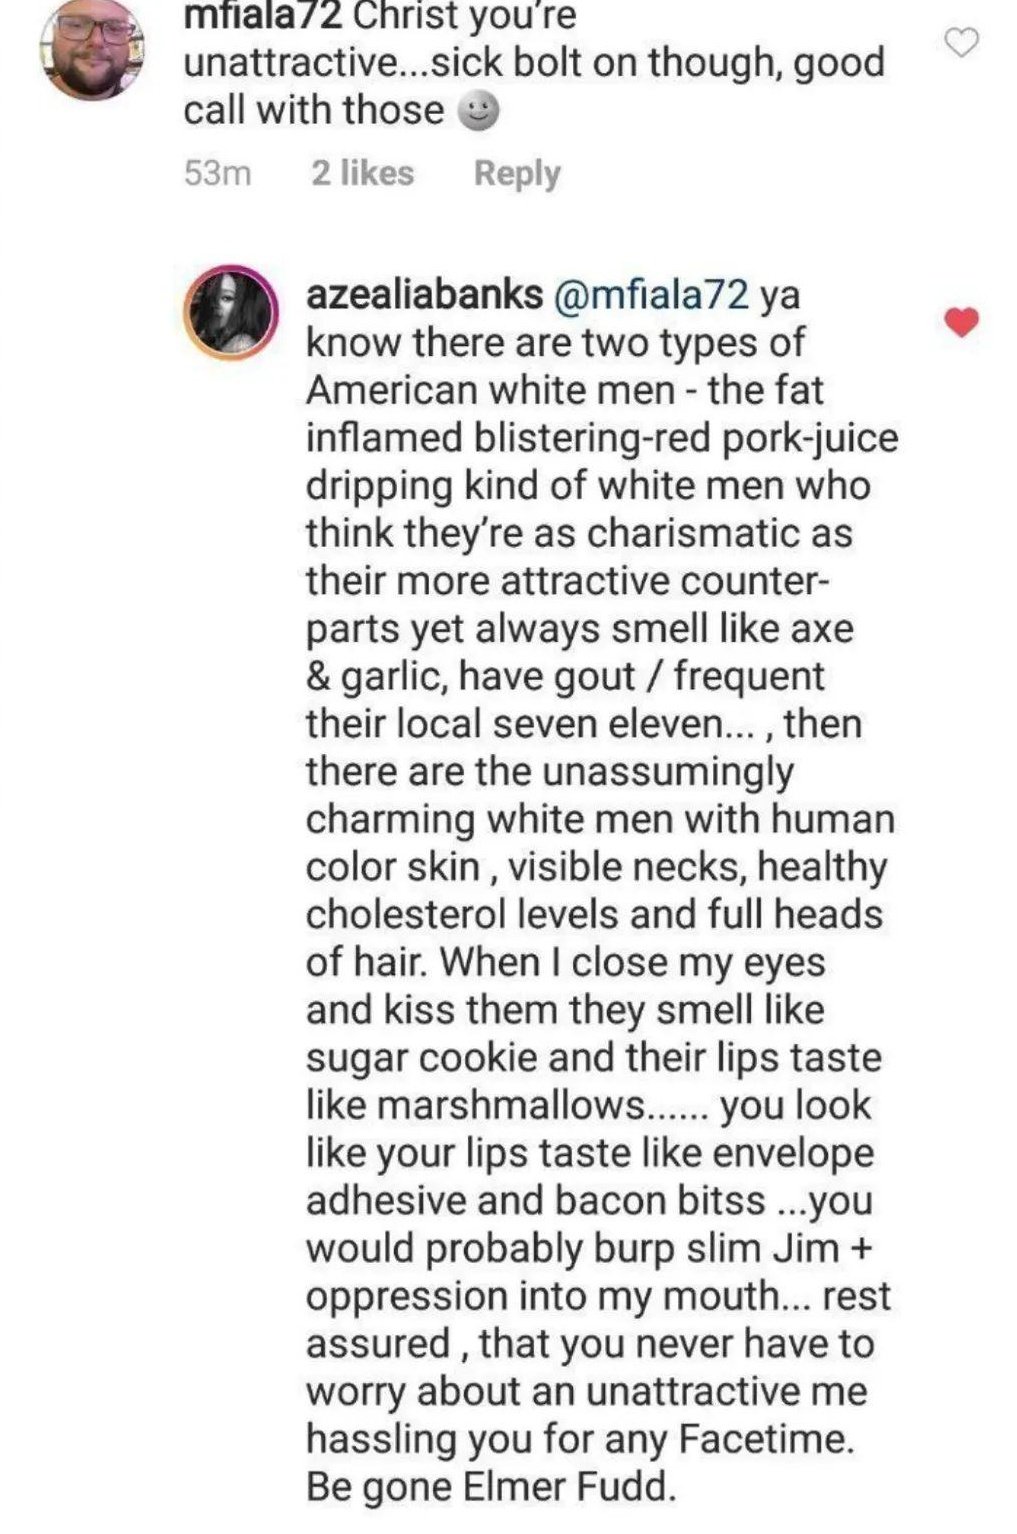 best azealia banks posts - azealia banks instagram comment - mfiala72 Christ you're unattractive...sick bolt on though, good call with those 53m 2 azealiabanks ya know there are two types of American white men the fat inflamed blisteringred porkjuice drip